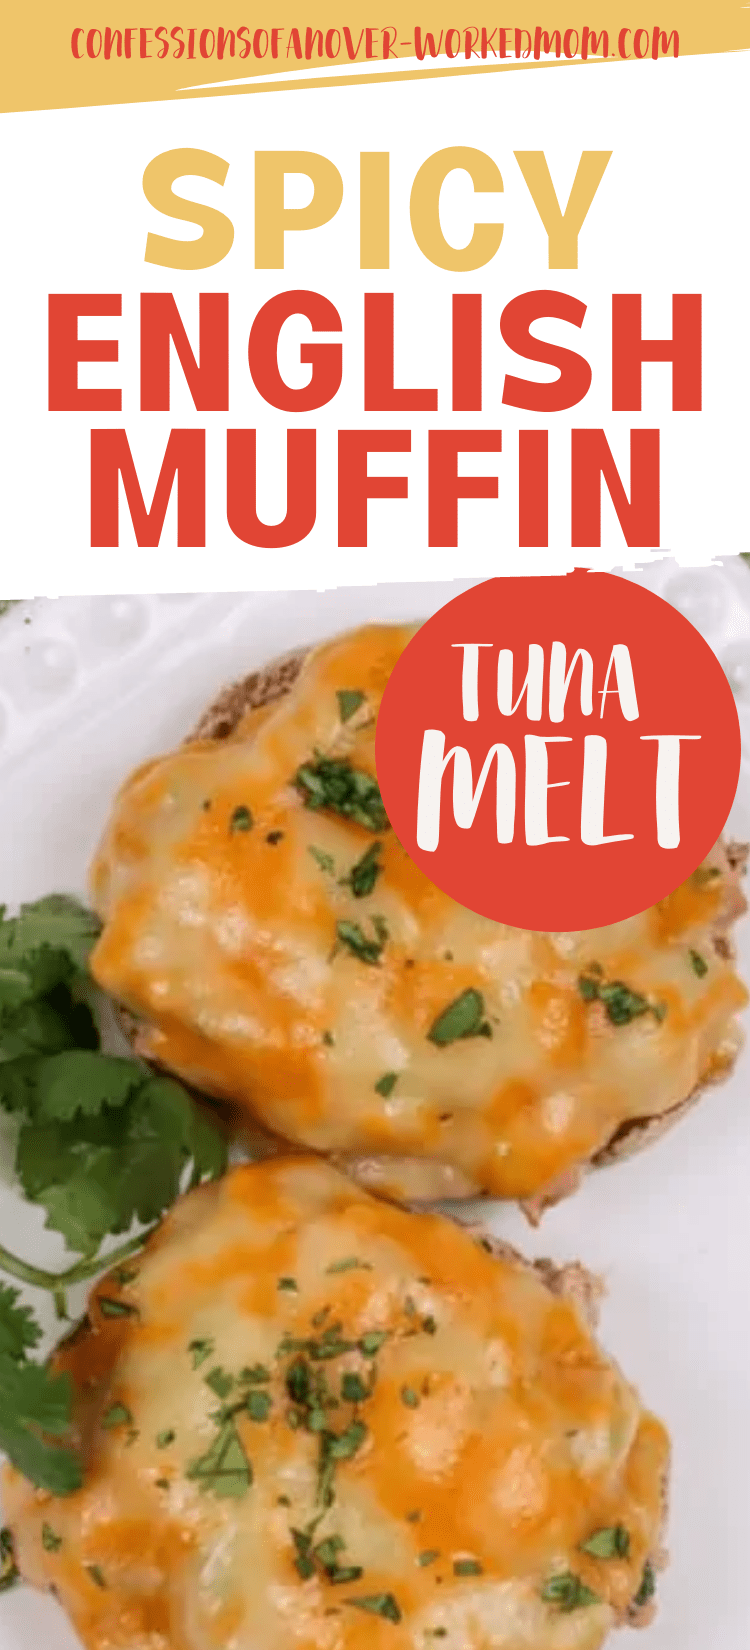 This spicy tuna melt on an English muffin is a delicious twist on the classic tuna melt sandwich. Try this easy grilled sandwich for lunch.